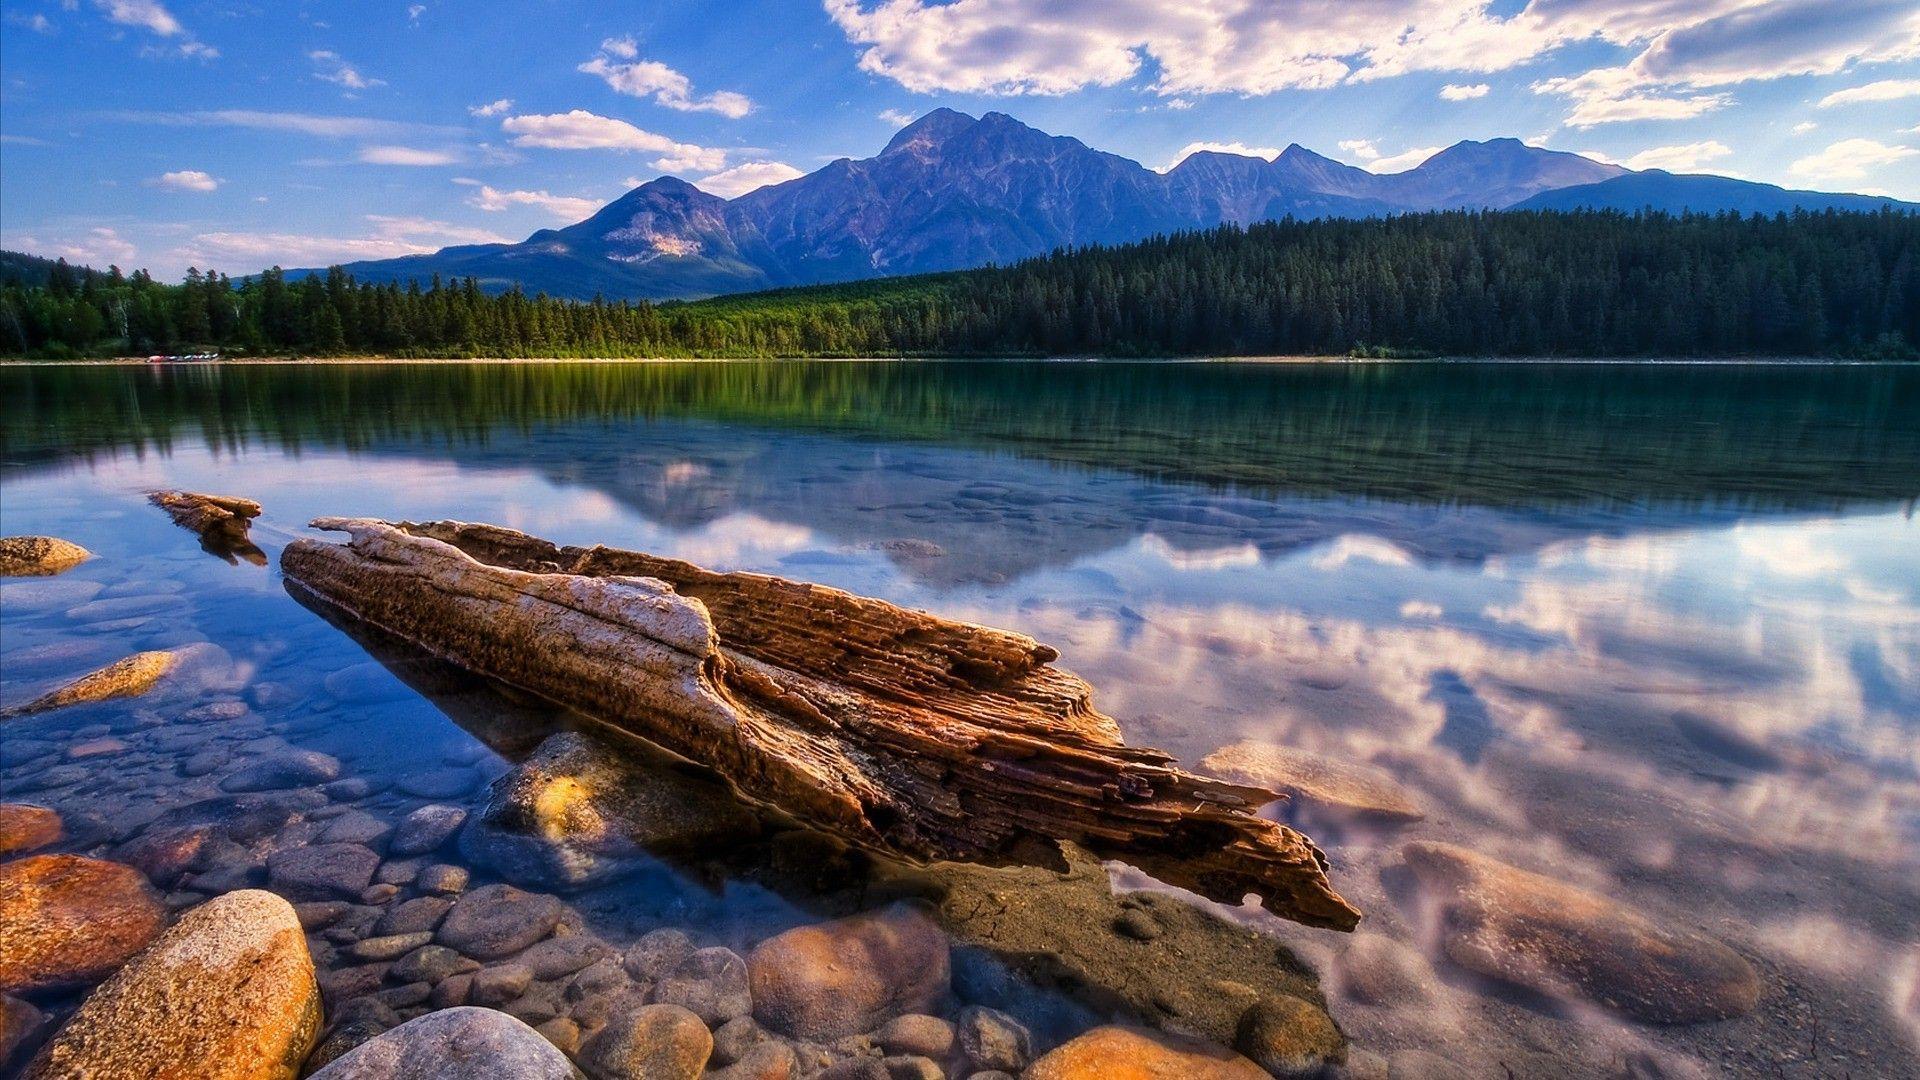 1920x1080 Patricia Lake, Canada wallpaper for desktop and mobile devices - Lake